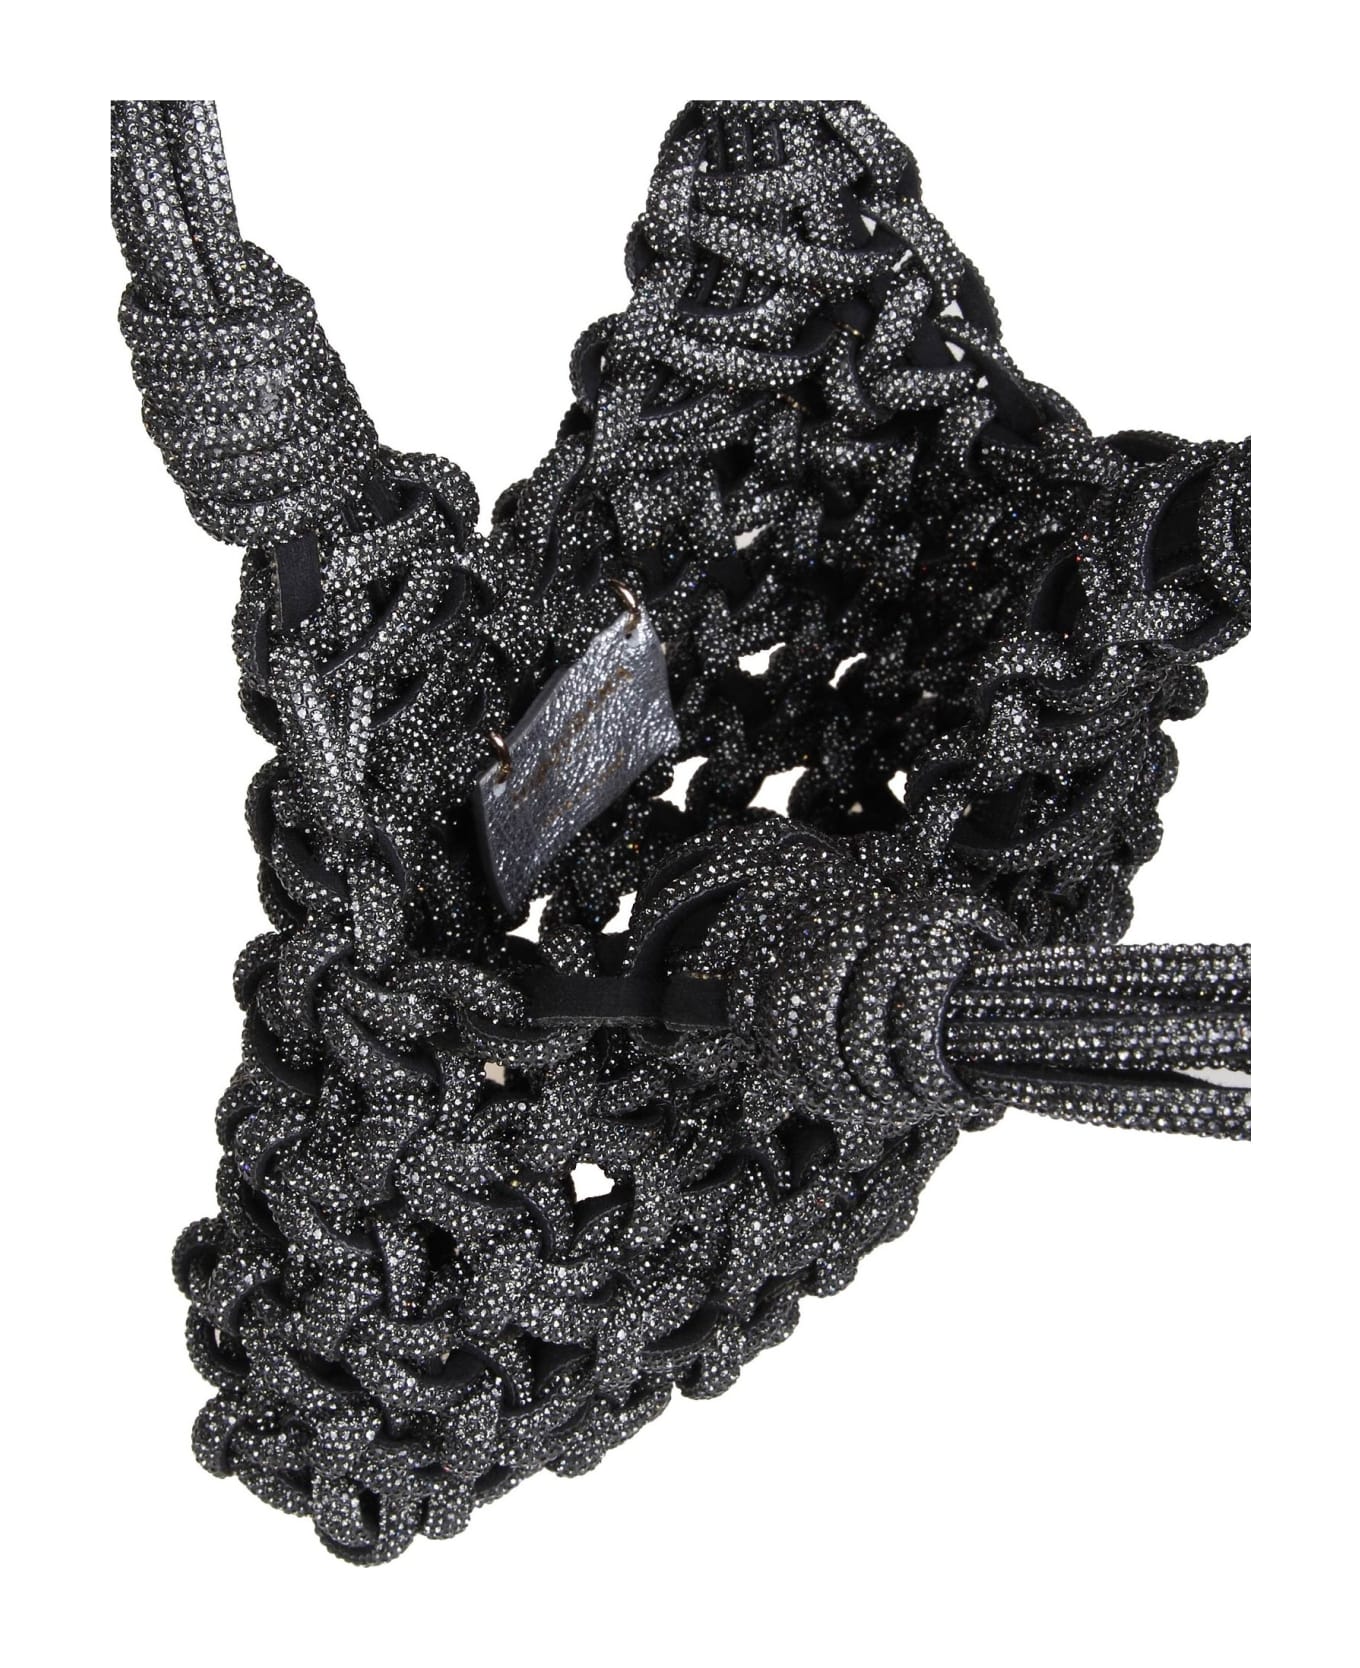 Hibourama Jewel Bag With Weaving And Applied Crystals - Black トートバッグ